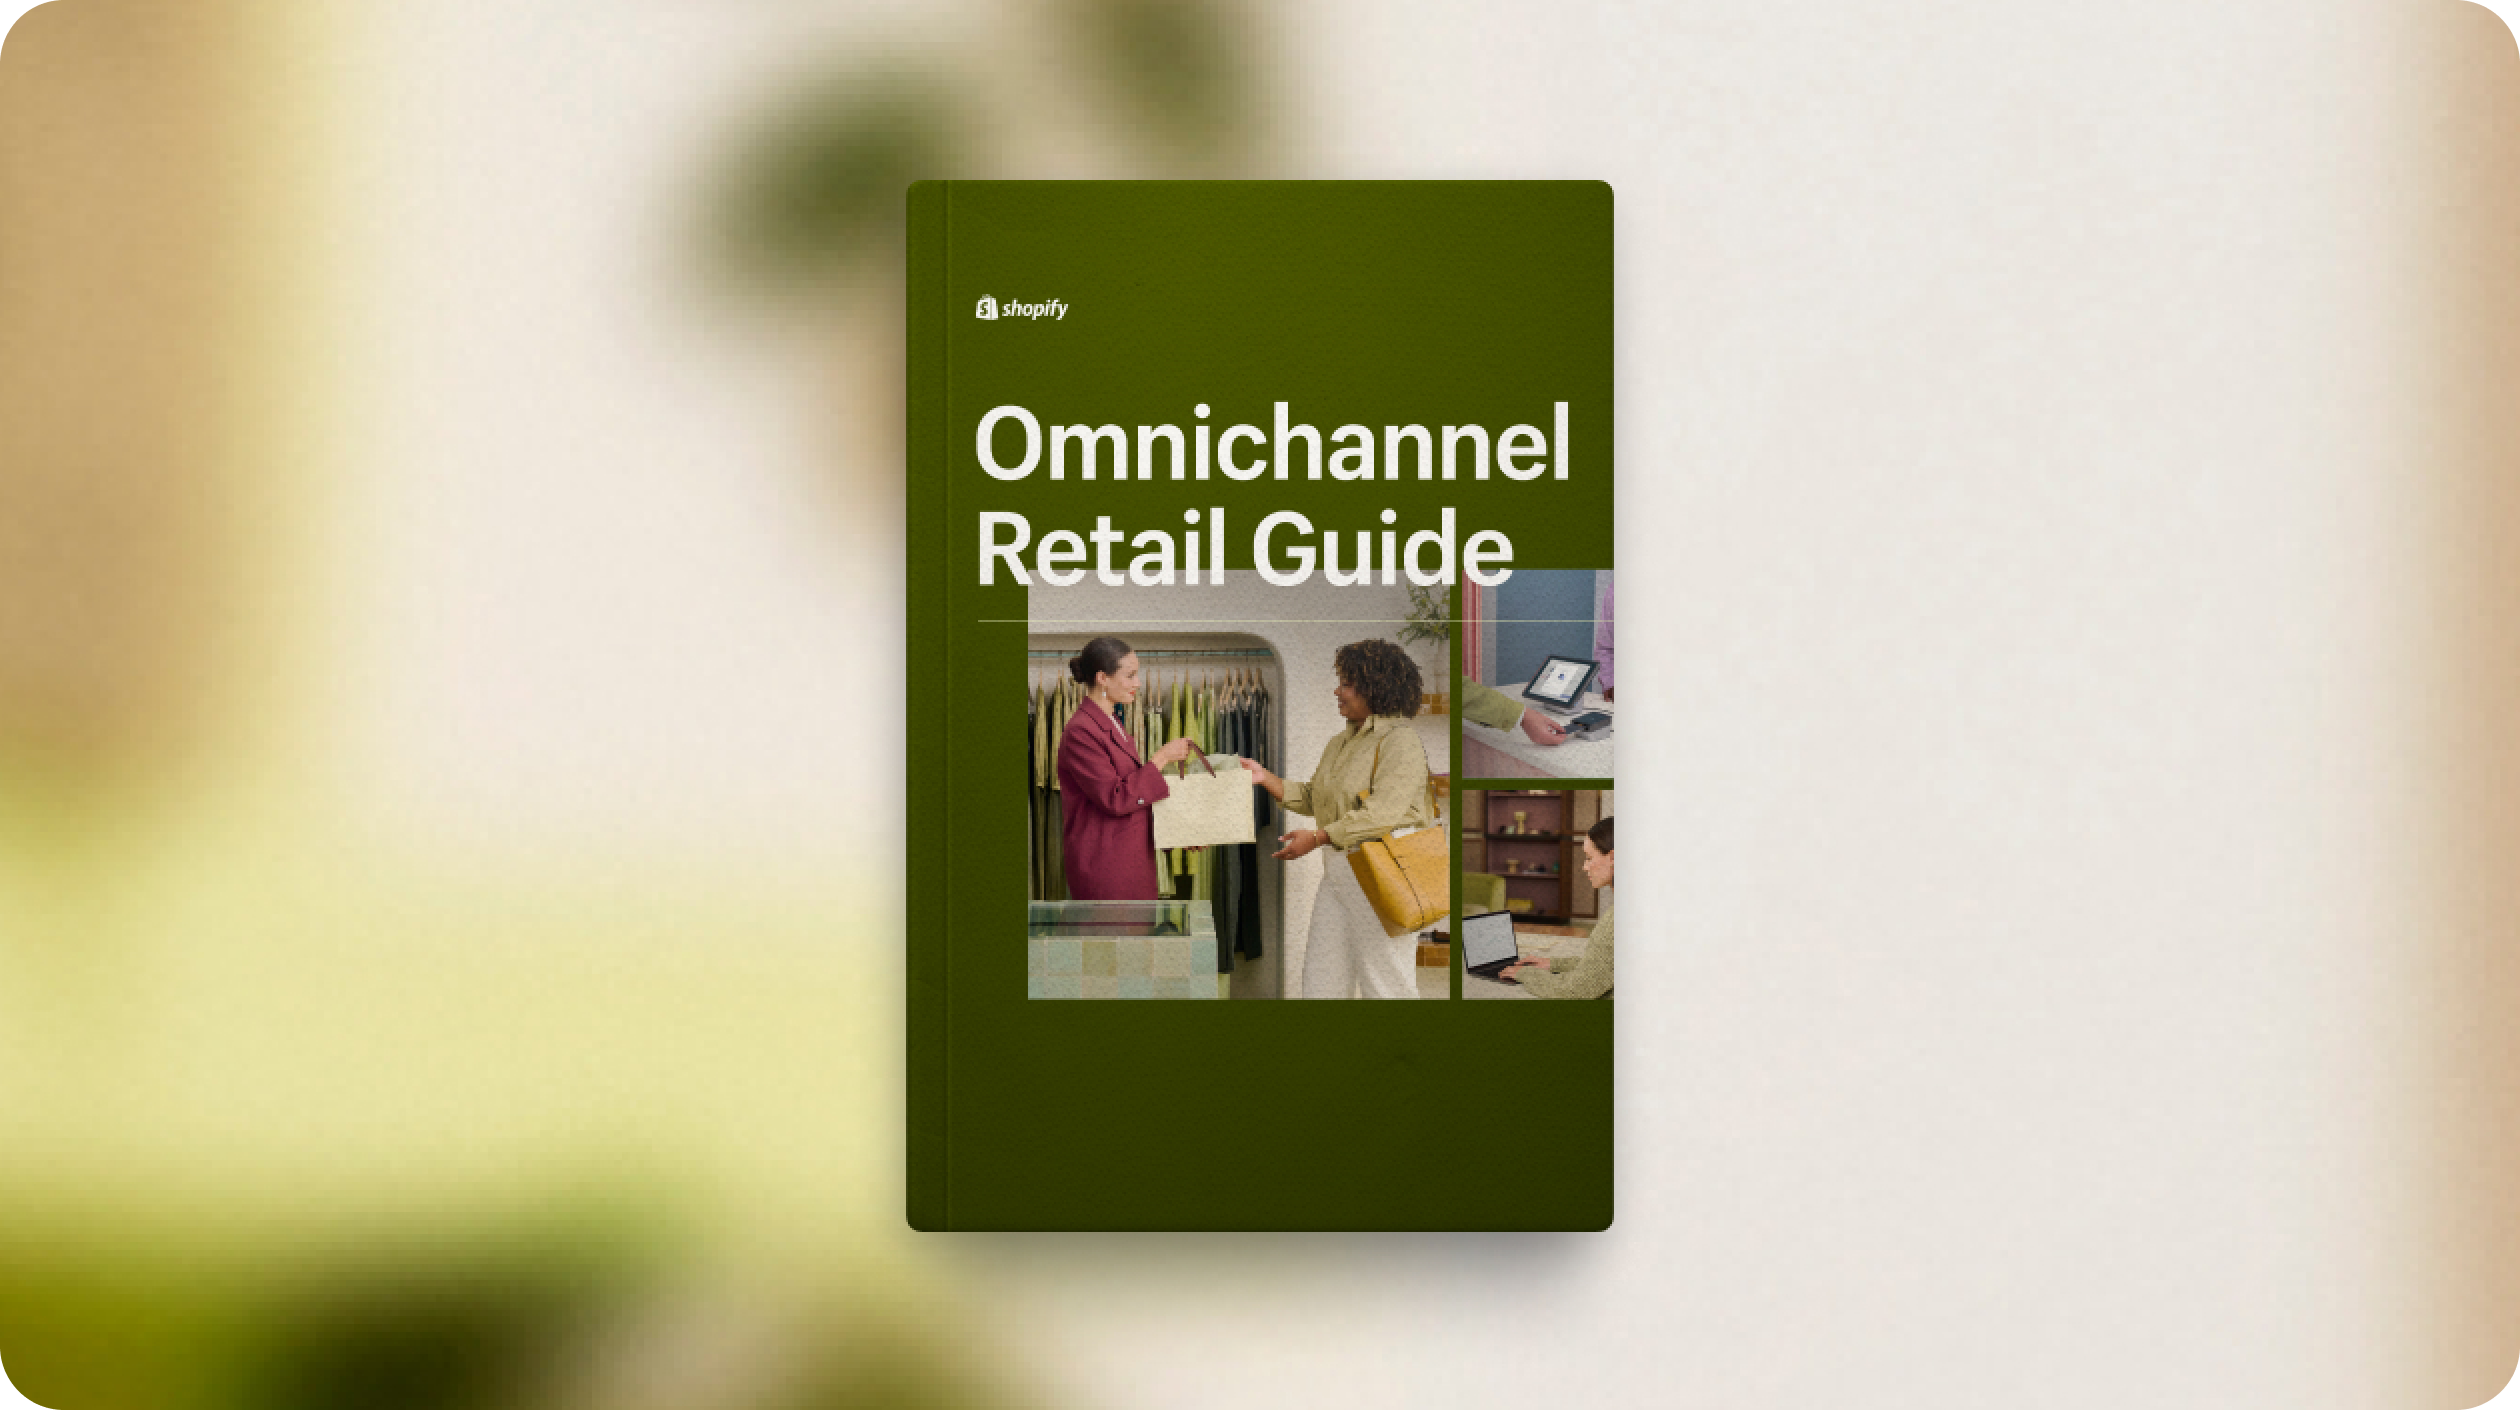 The cover of the Omnichannel Retail guide sits against a backdrop.